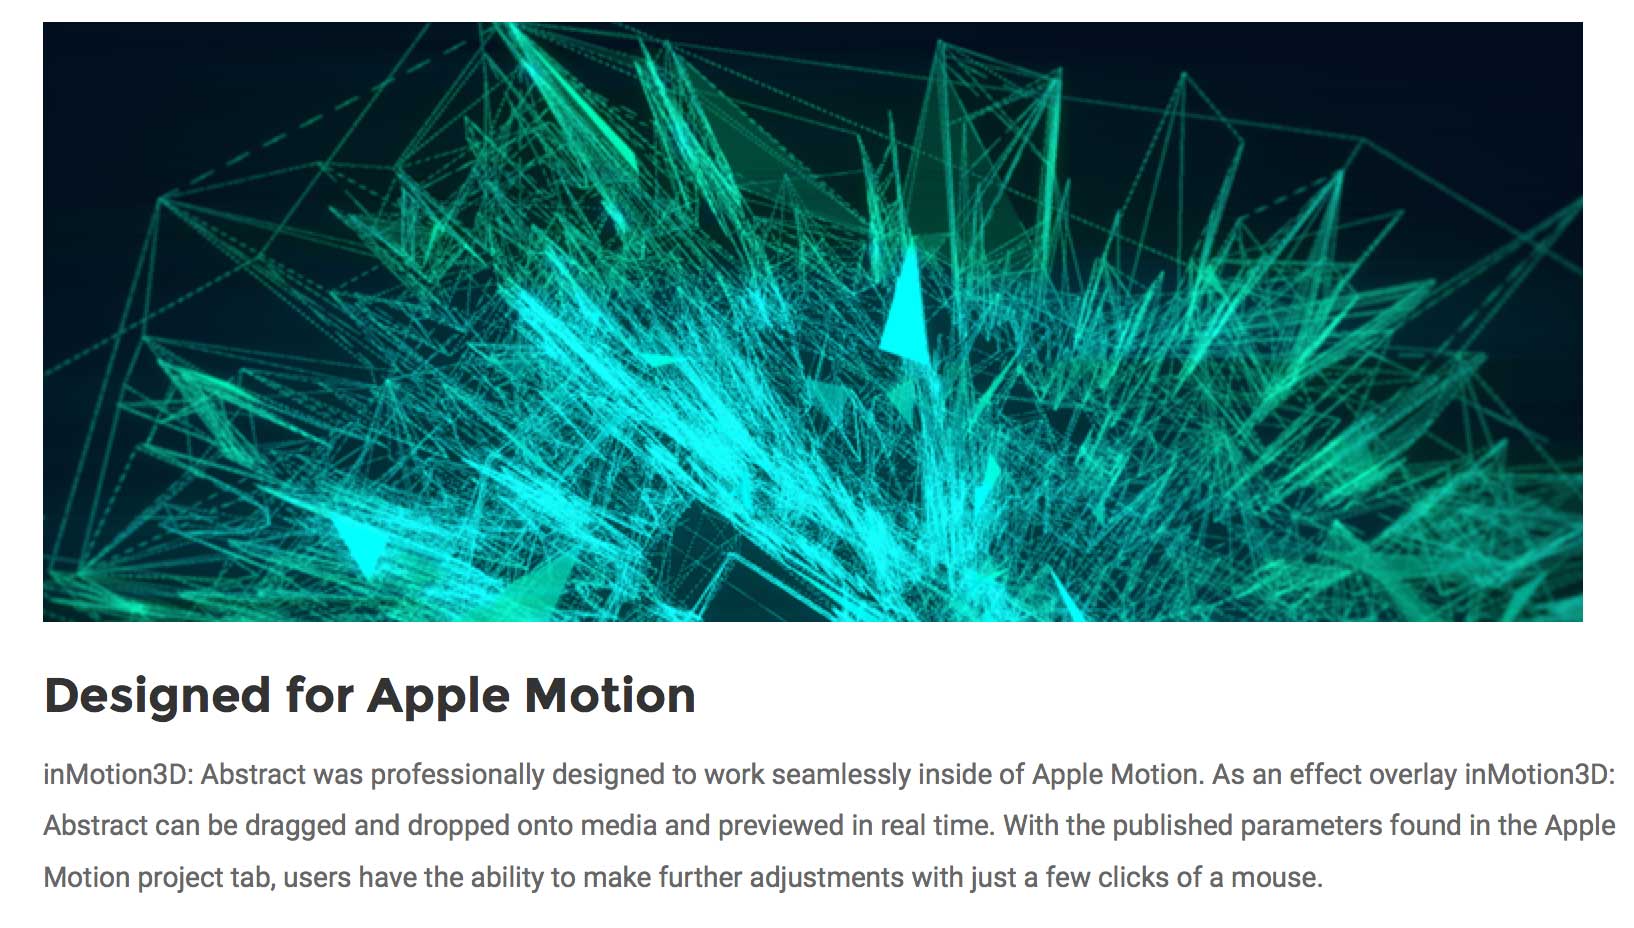 Pixel Film Studios - inMotion 3D Abstract - Apple Motion